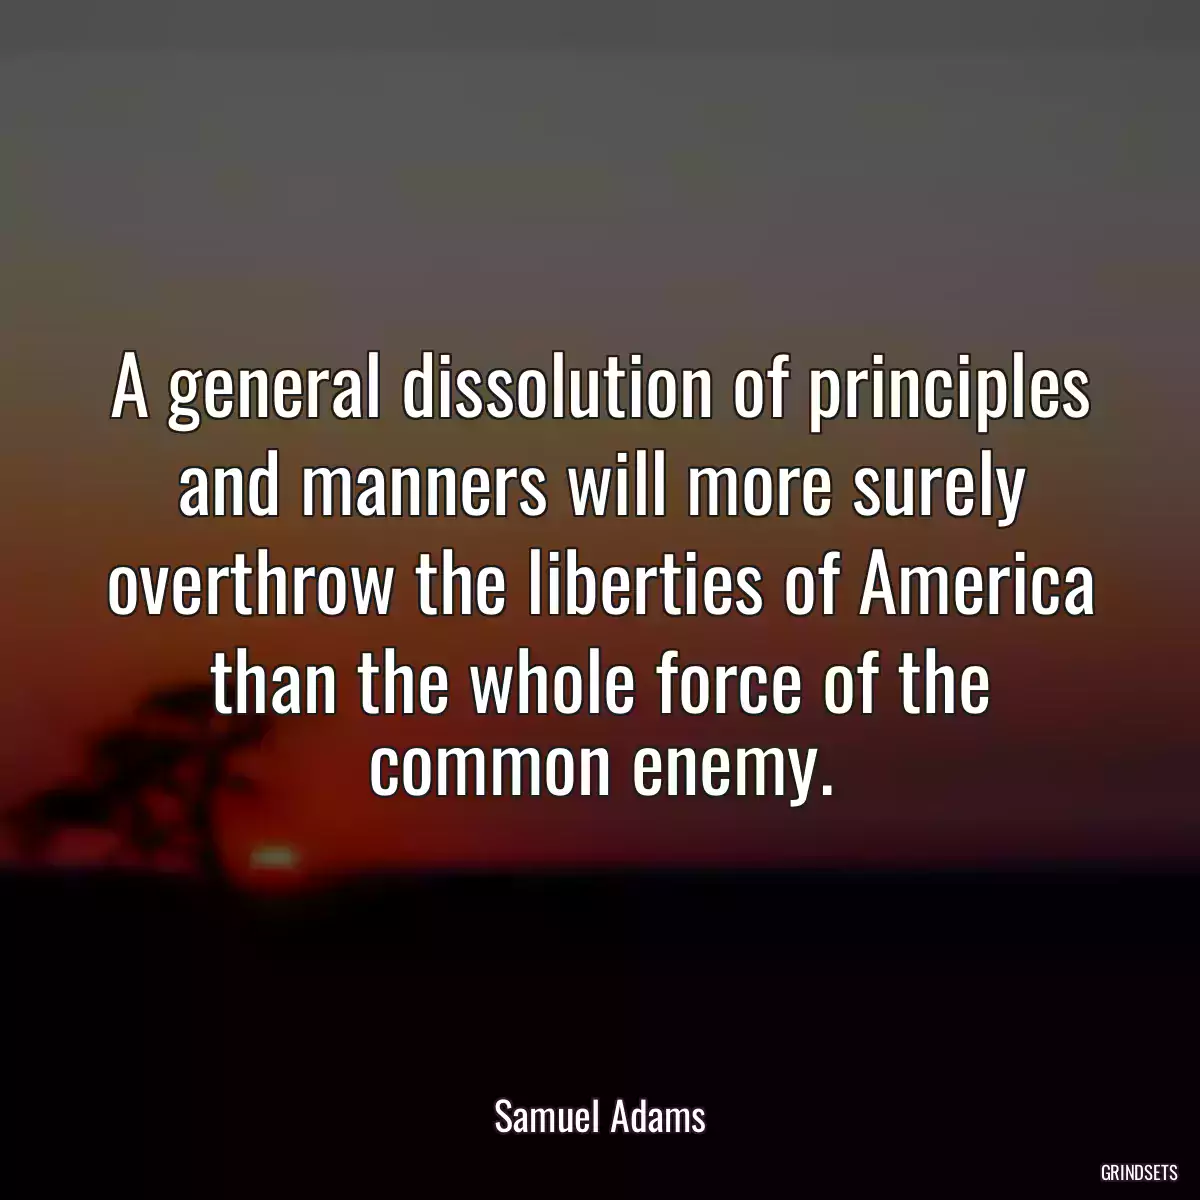 A general dissolution of principles and manners will more surely overthrow the liberties of America than the whole force of the common enemy.